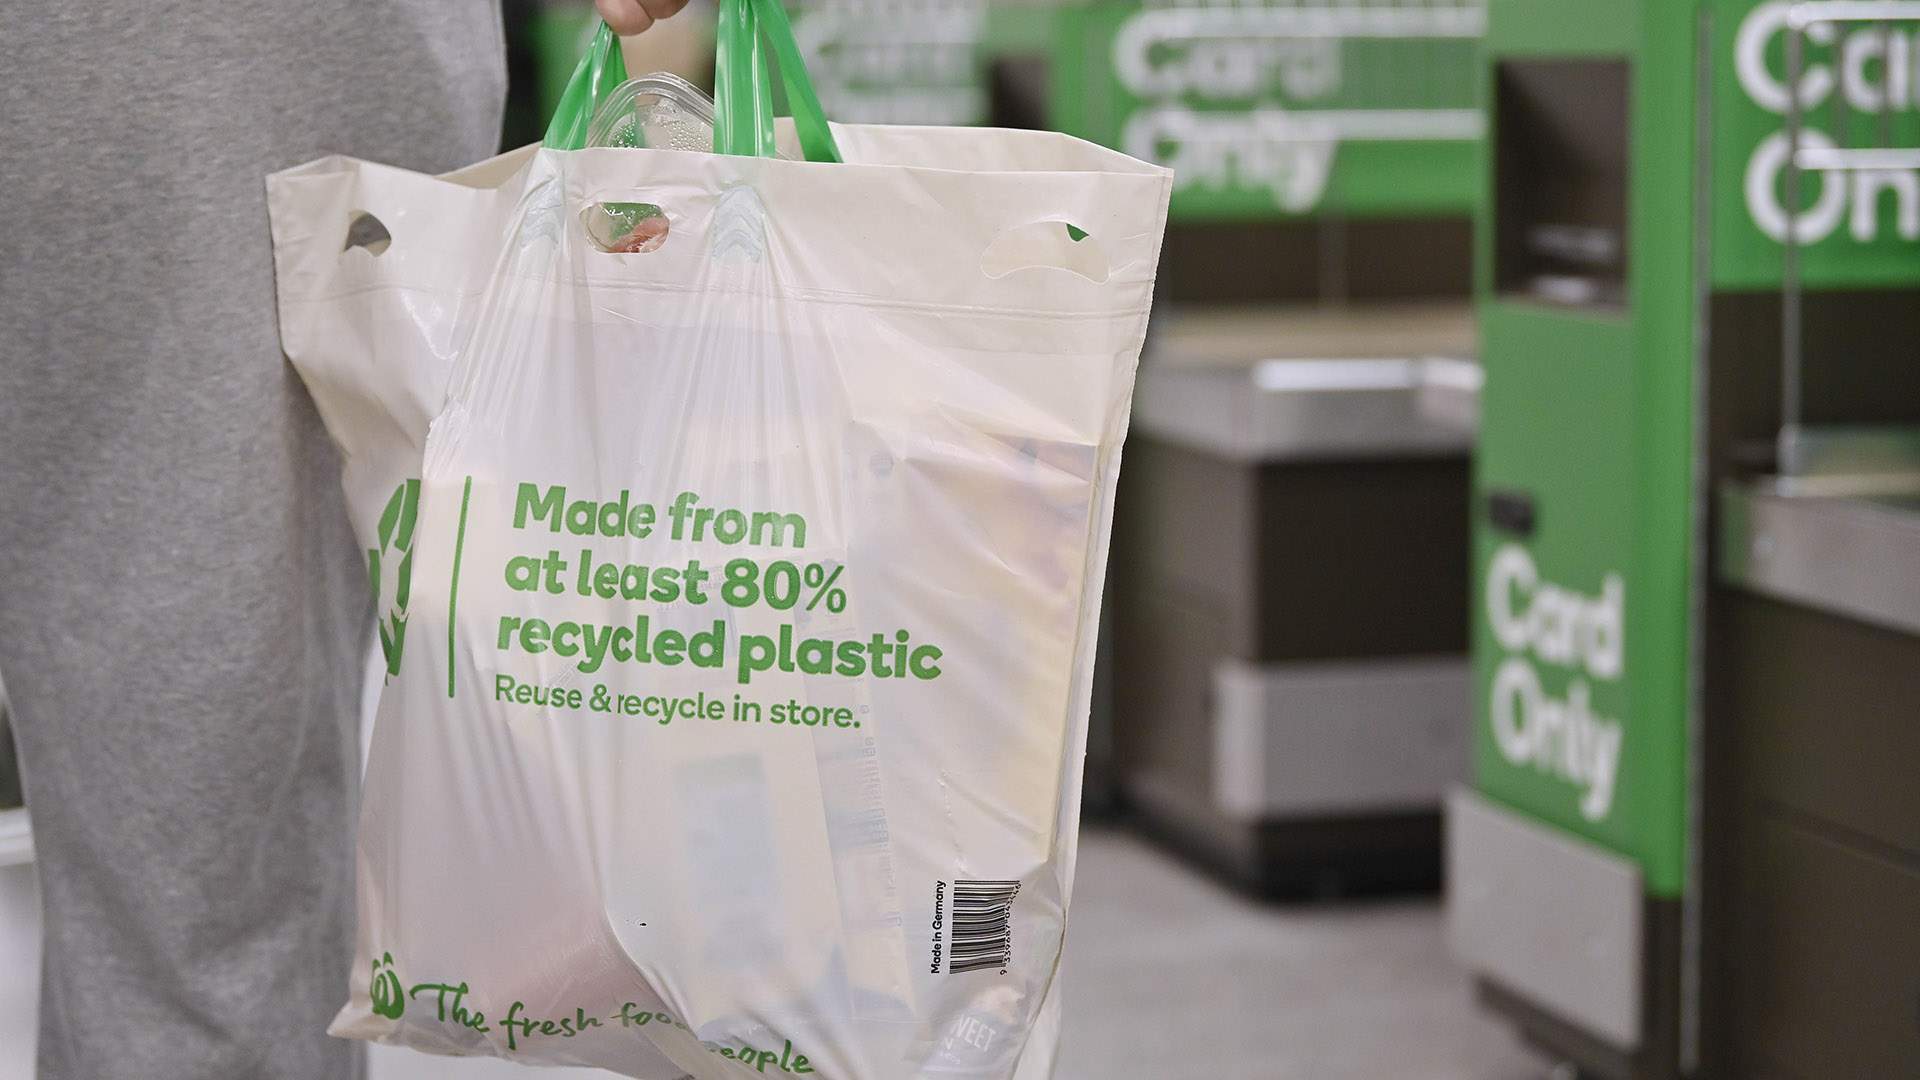 Woolworths and Big W Are Completely Ditching Reusable Plastic Bags